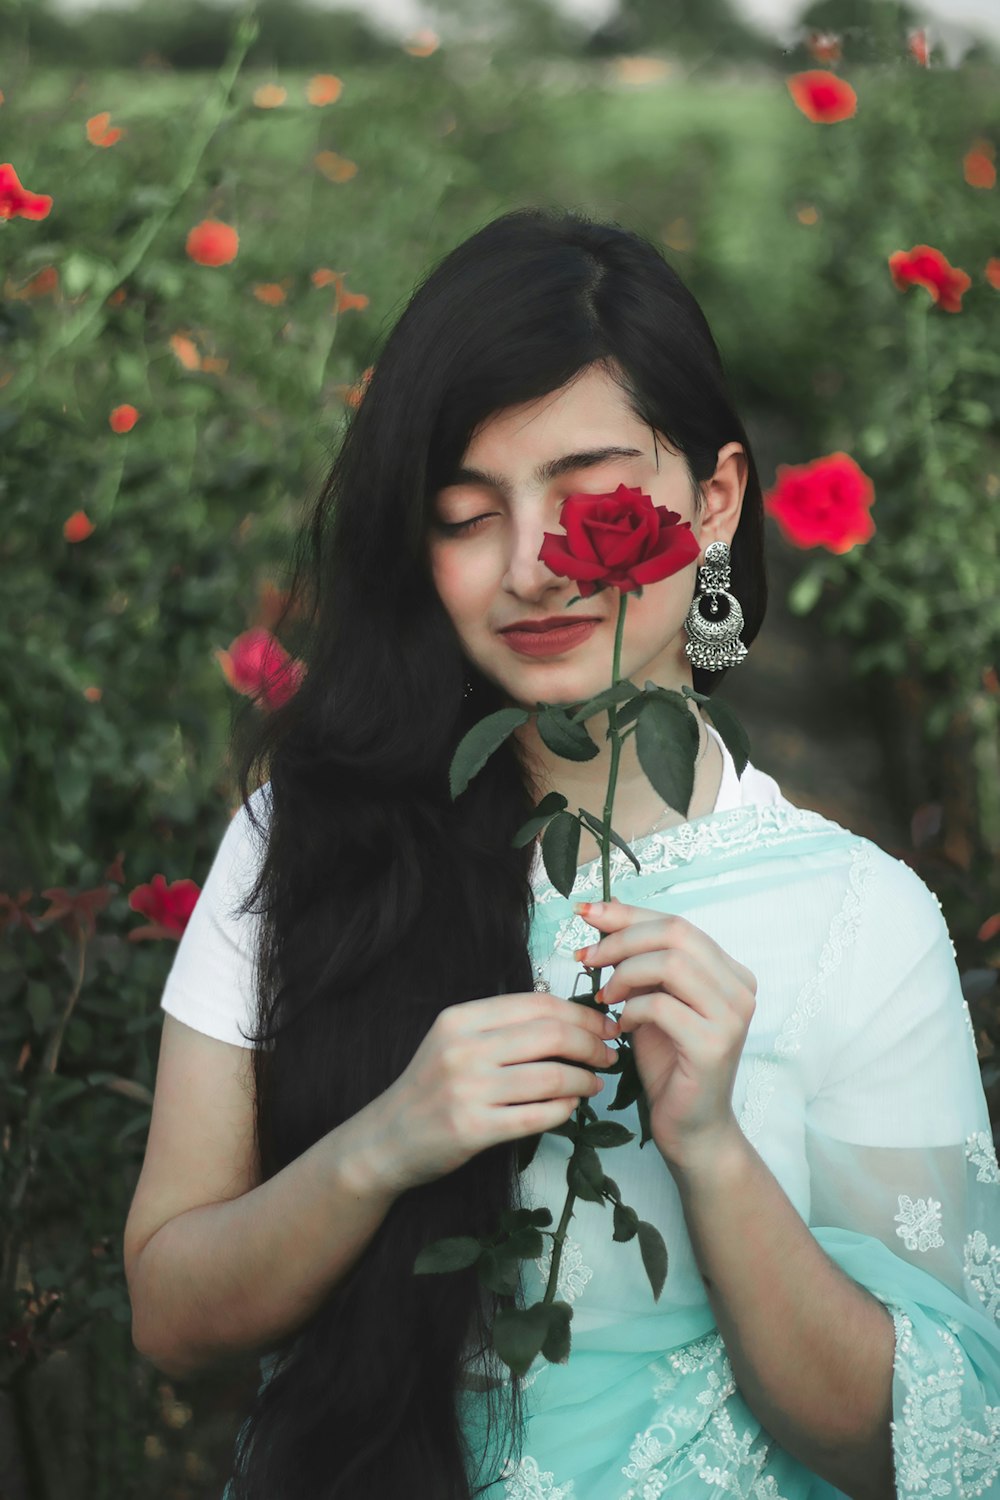 a woman with long black hair holding a rose